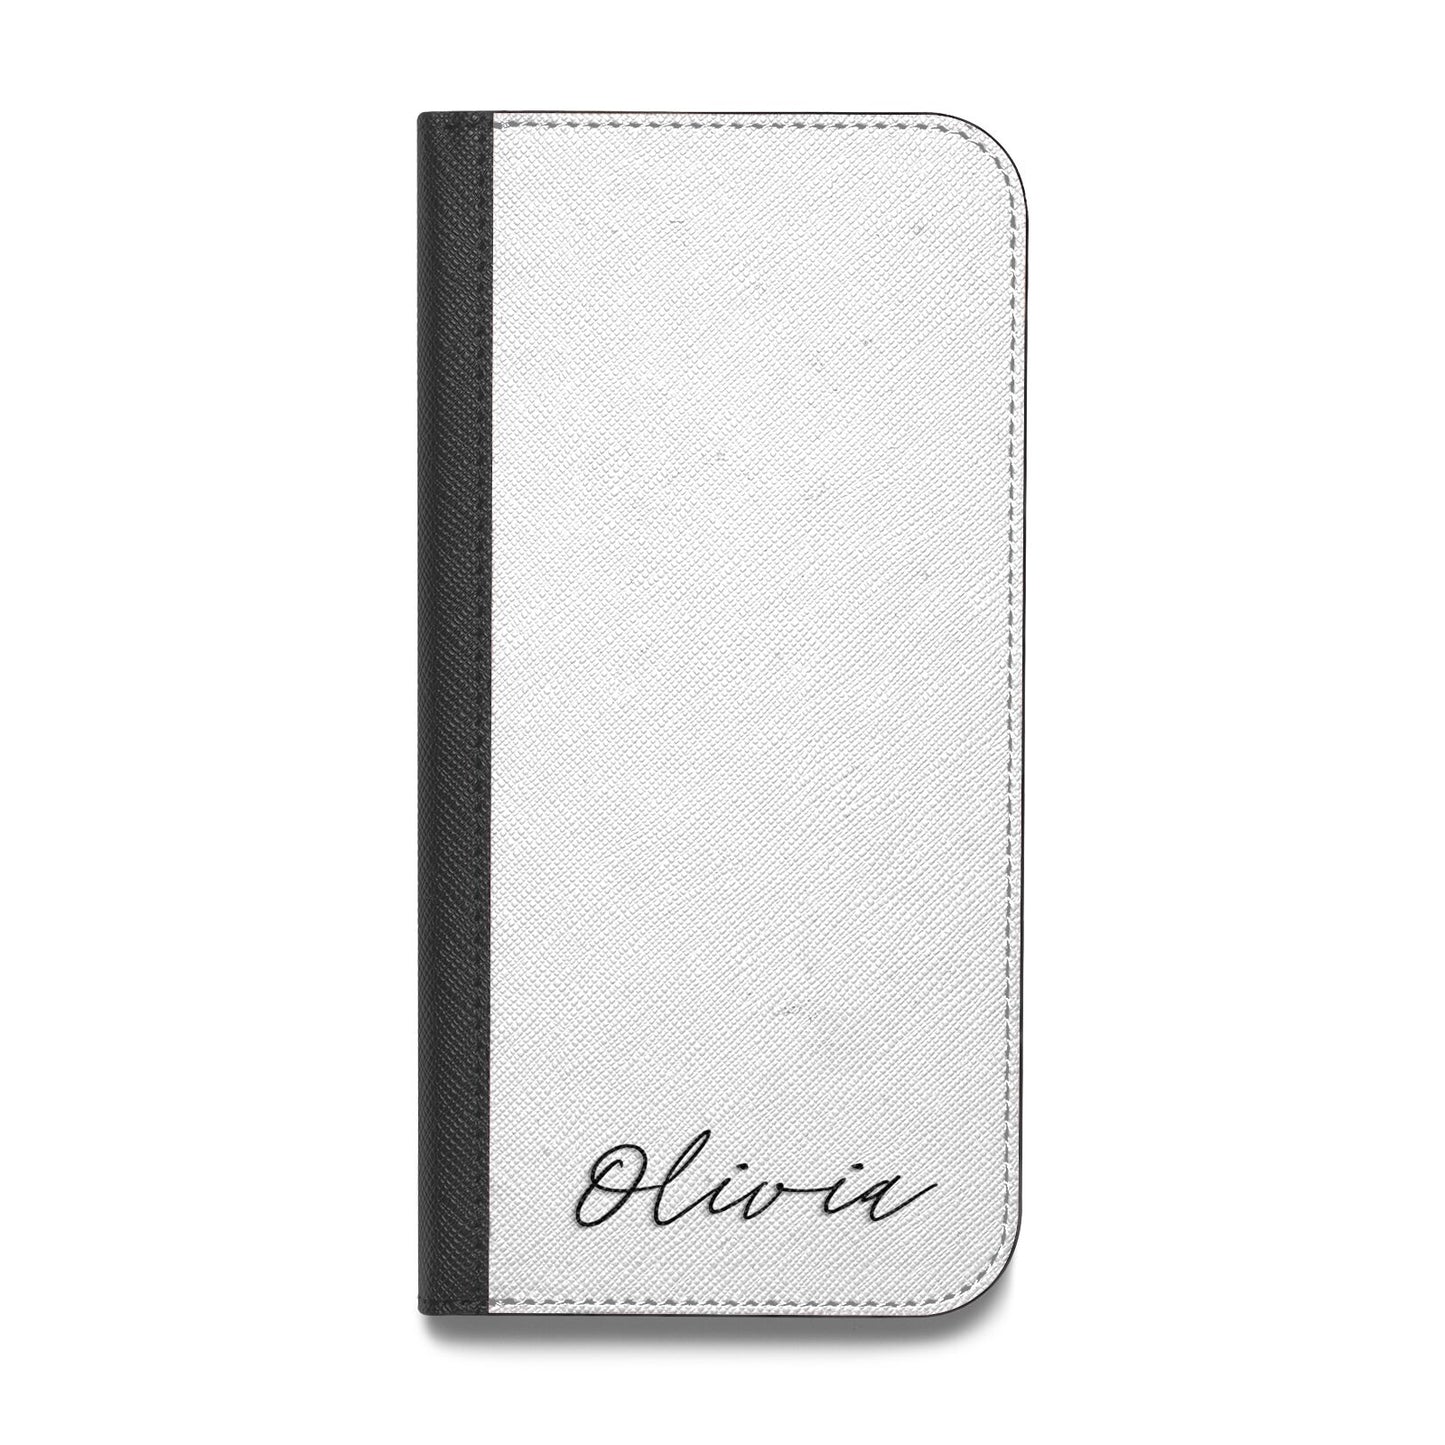 Scroll Text Name Vegan Leather Flip iPhone Case